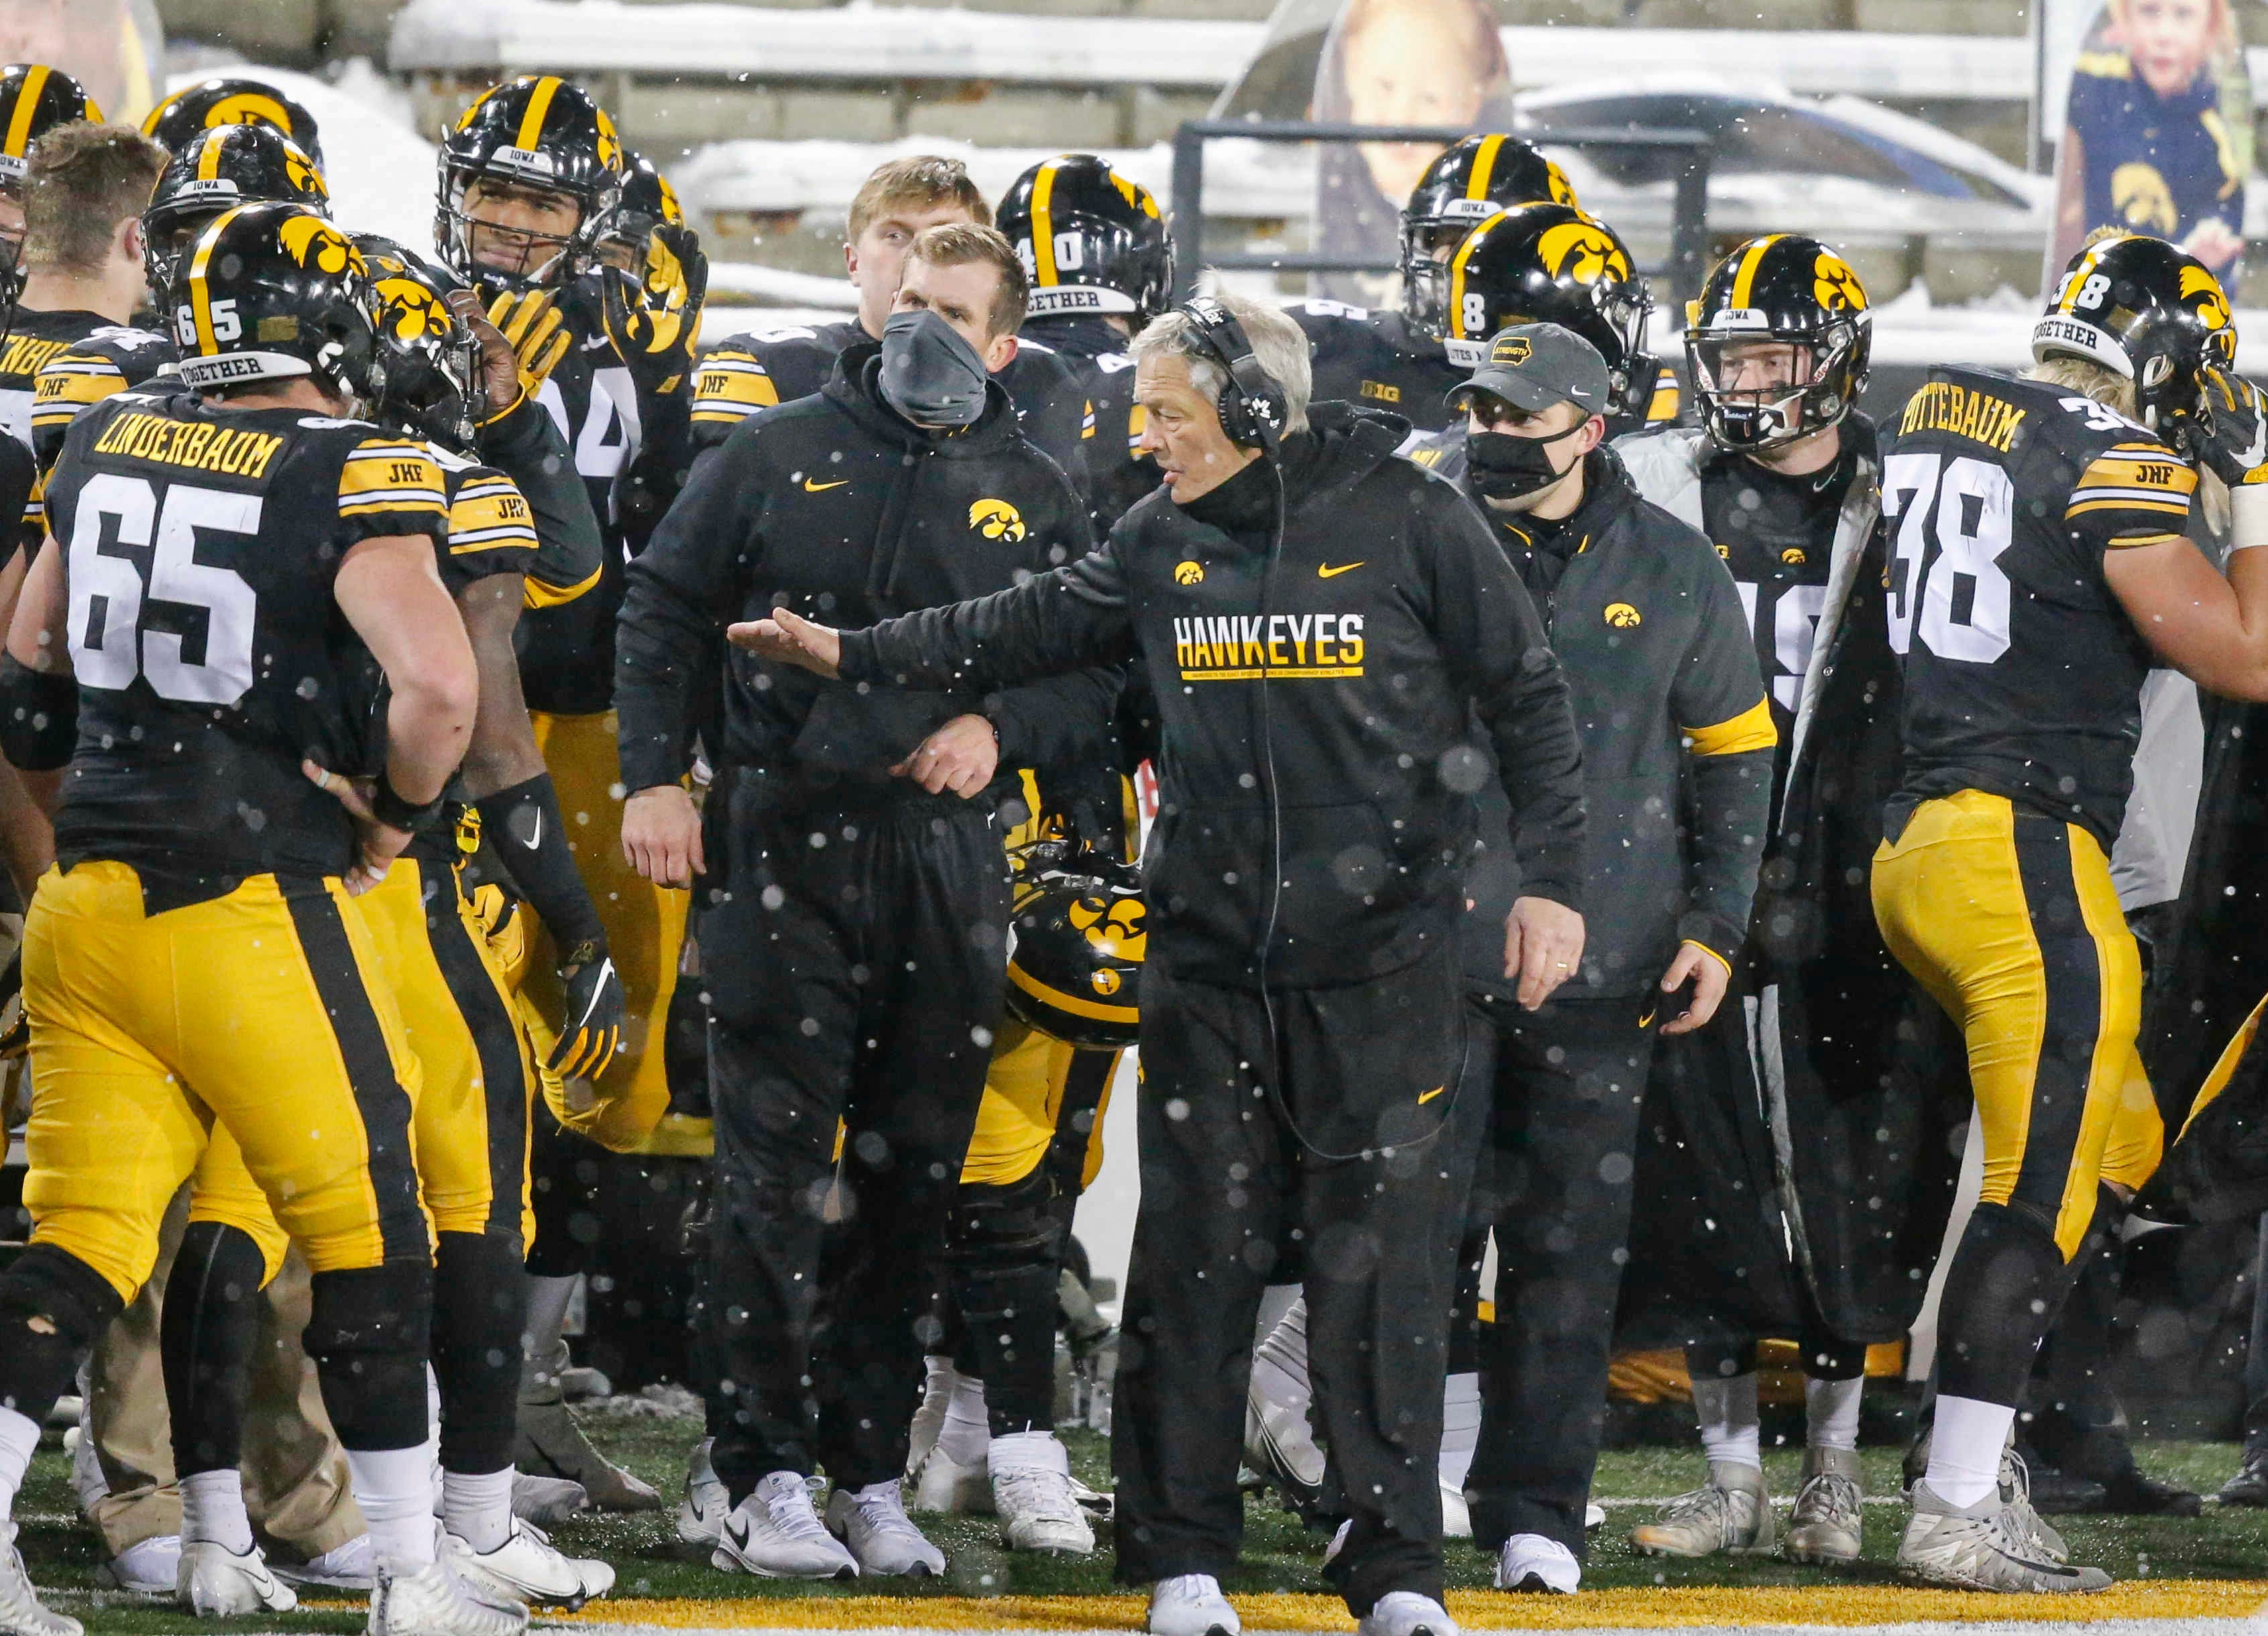 Iowa head football coach Kirk Ferentz celebrates with his team after the Hawkeyes scored a touchdown against Wisconsin in the third quarter on Saturday, Dec. 12, 2020, at Kinnick Stadium in Iowa City, Iowa.